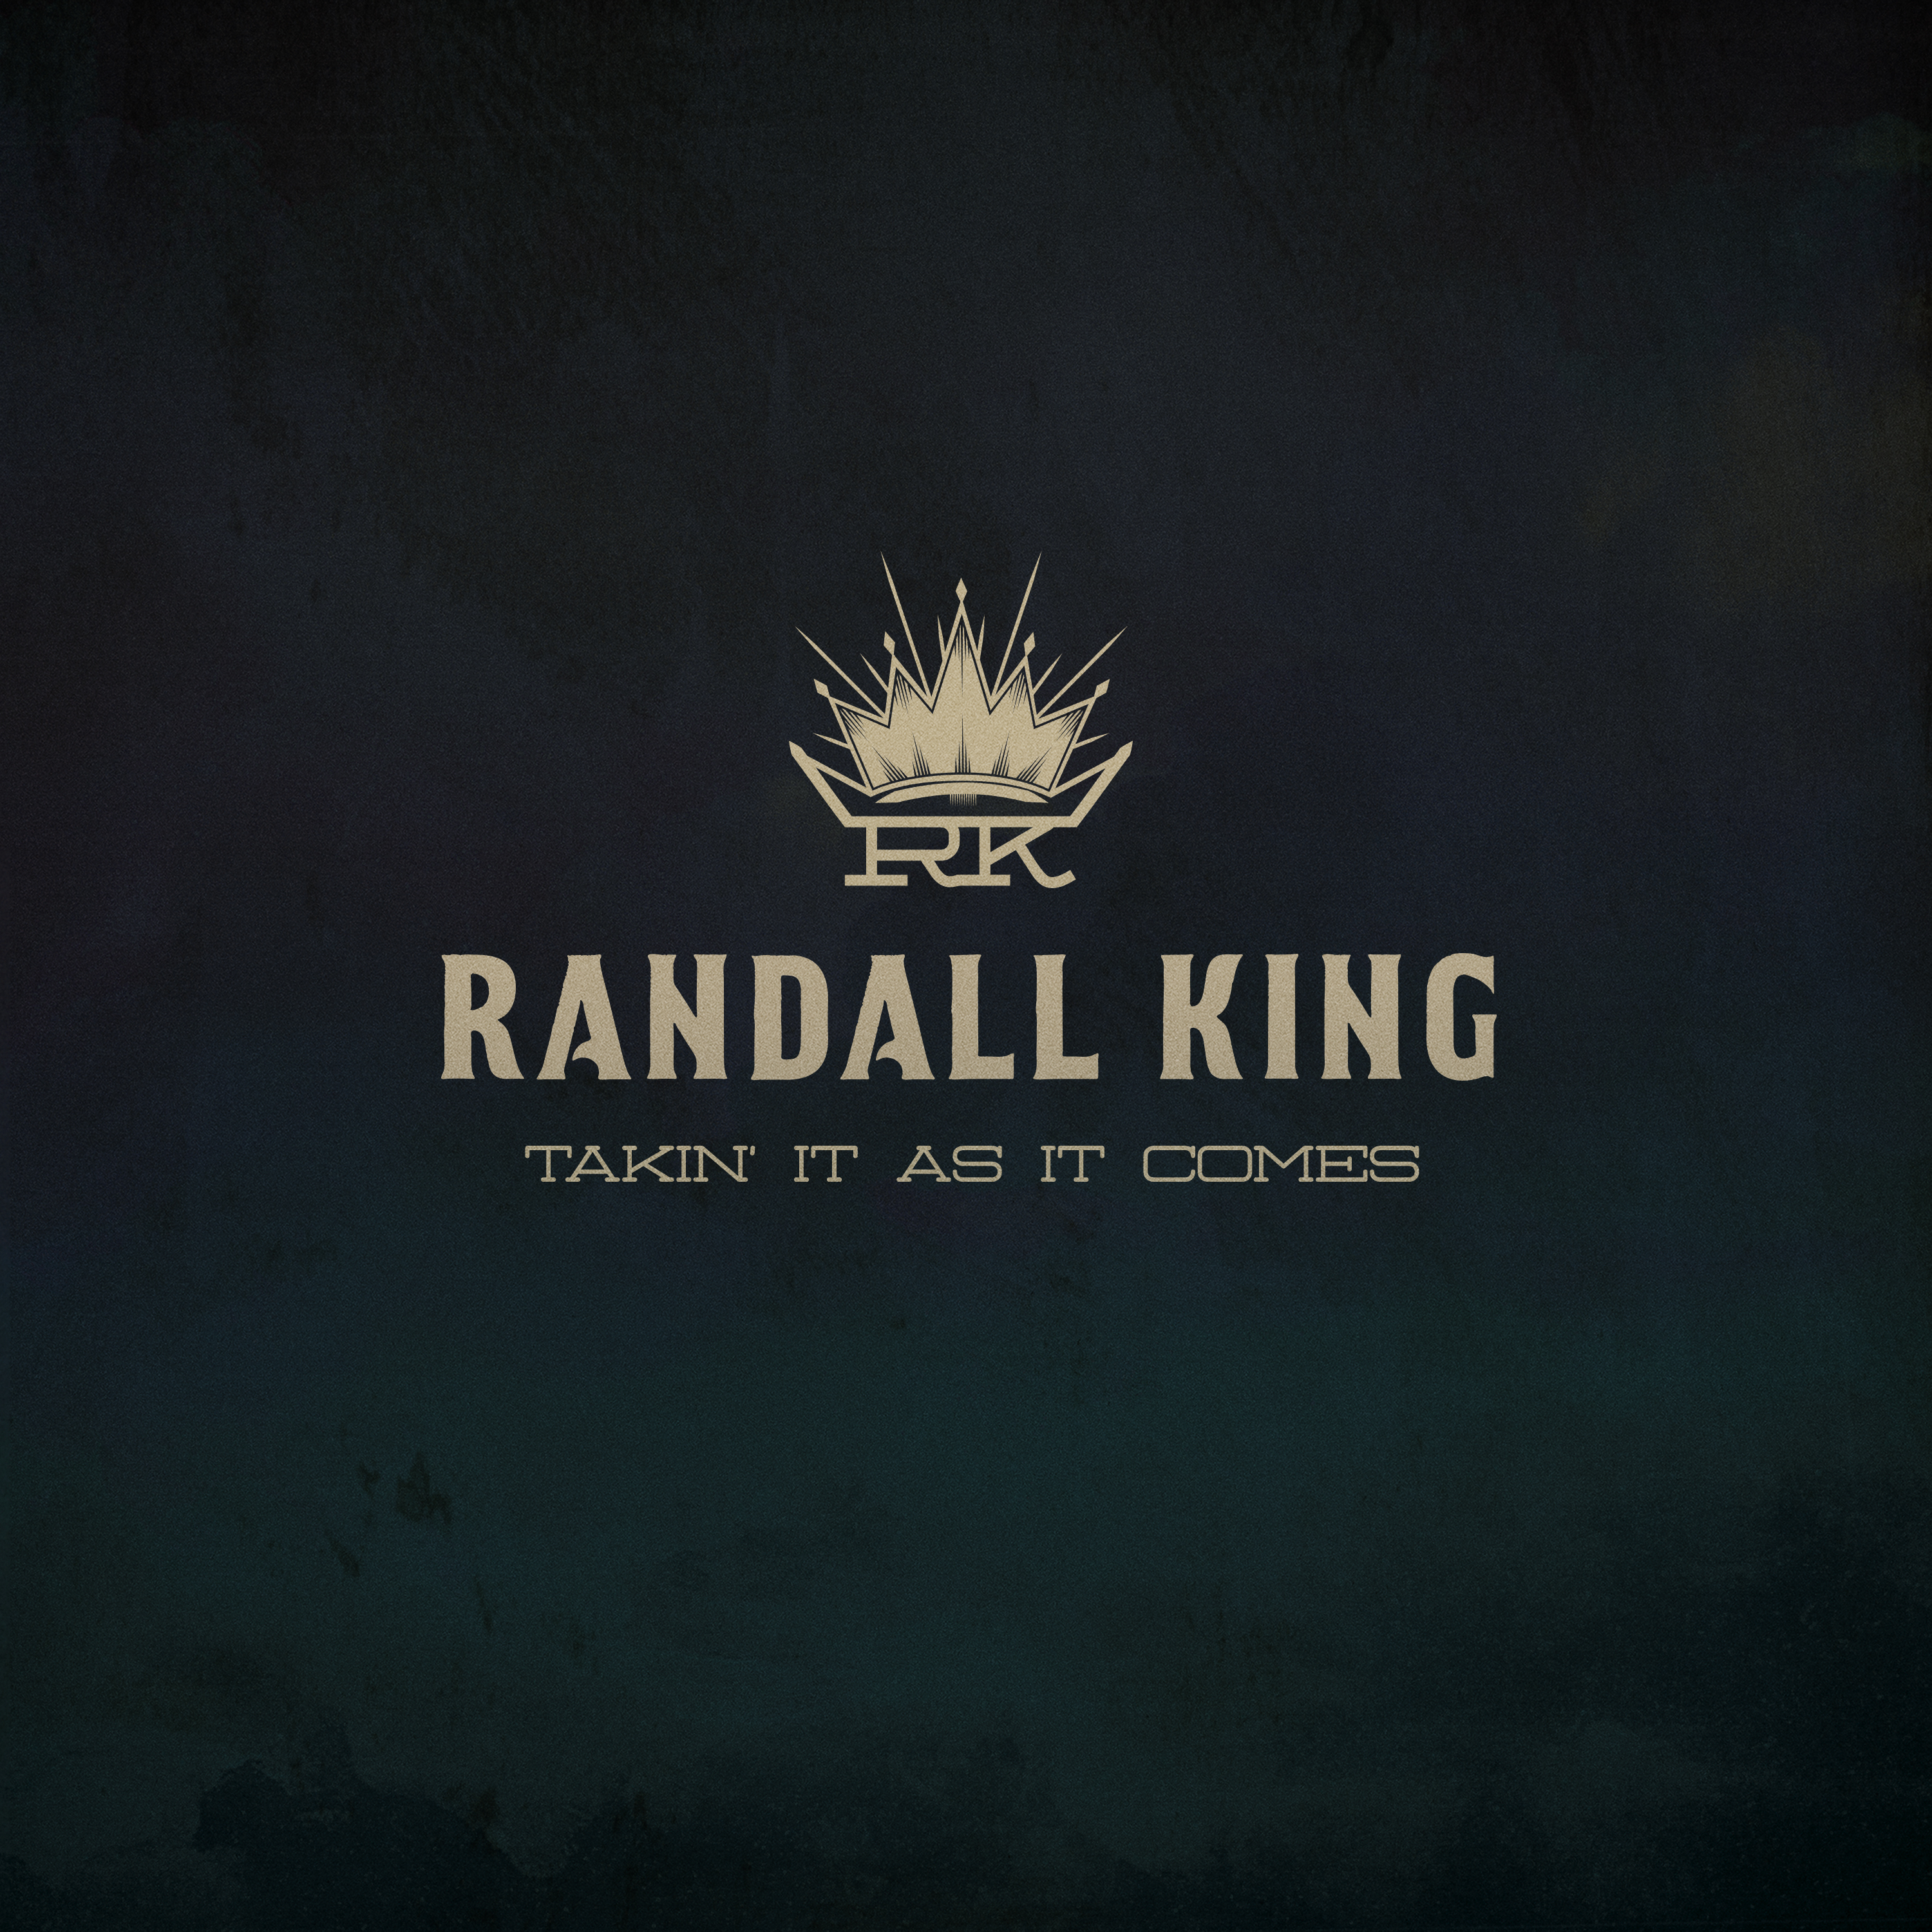 RANDALL KING OFFERS GLIMPSE INTO PERSONAL GRIEF WITH NEW SONG “TAKIN’ IT AS IT COMES”